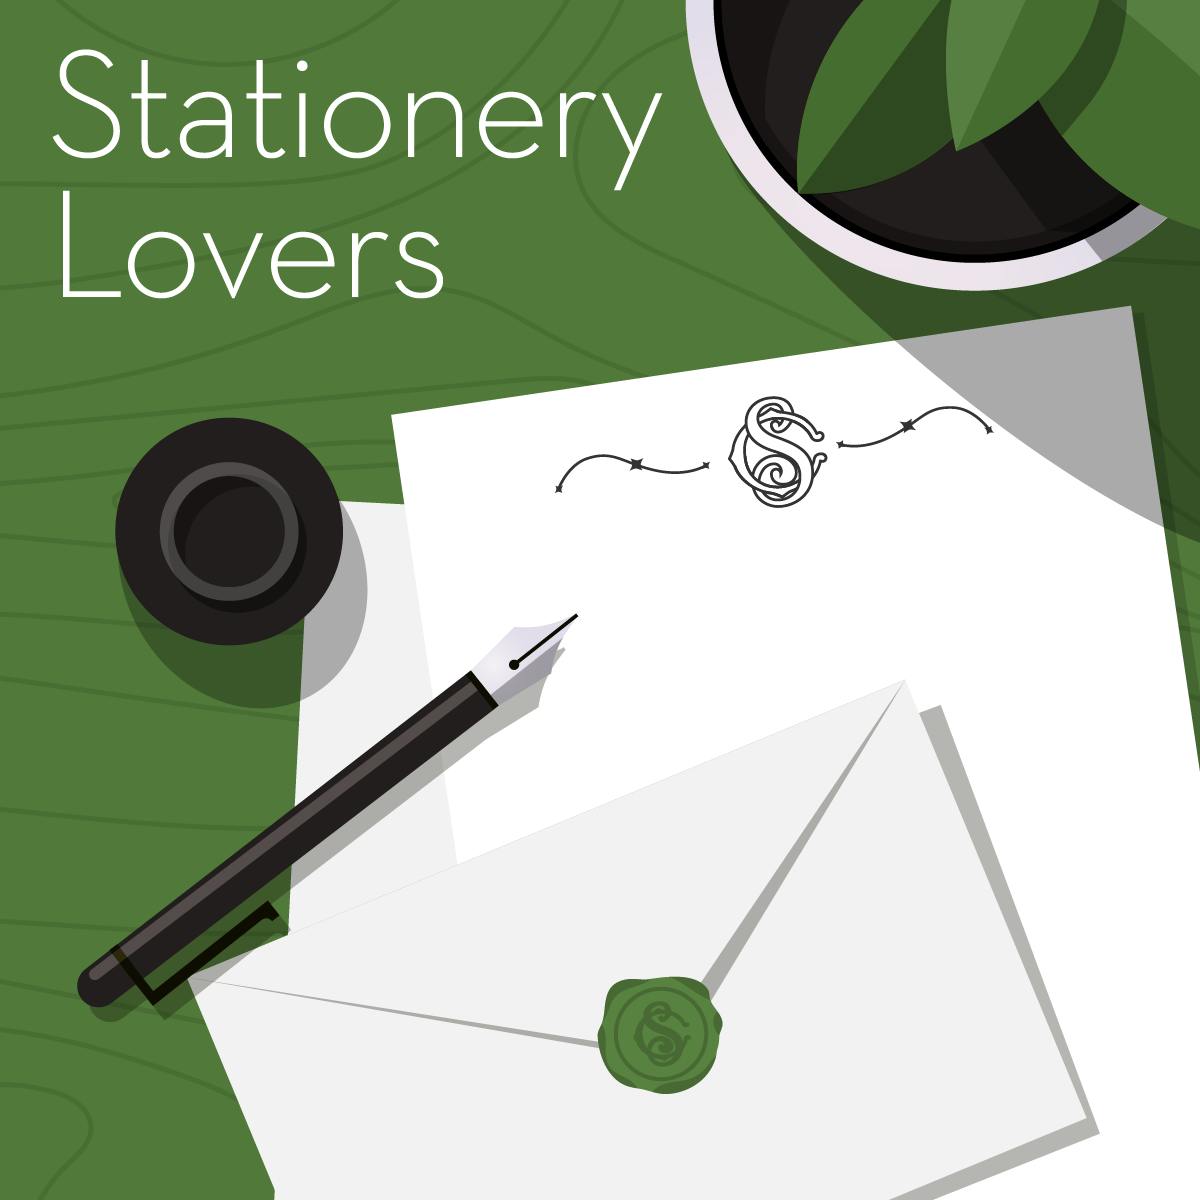 Illustration of a gift guide for stationery lovers. showing notepaper, an envelope, a fountain pen, and an ink bottle all on a green background.